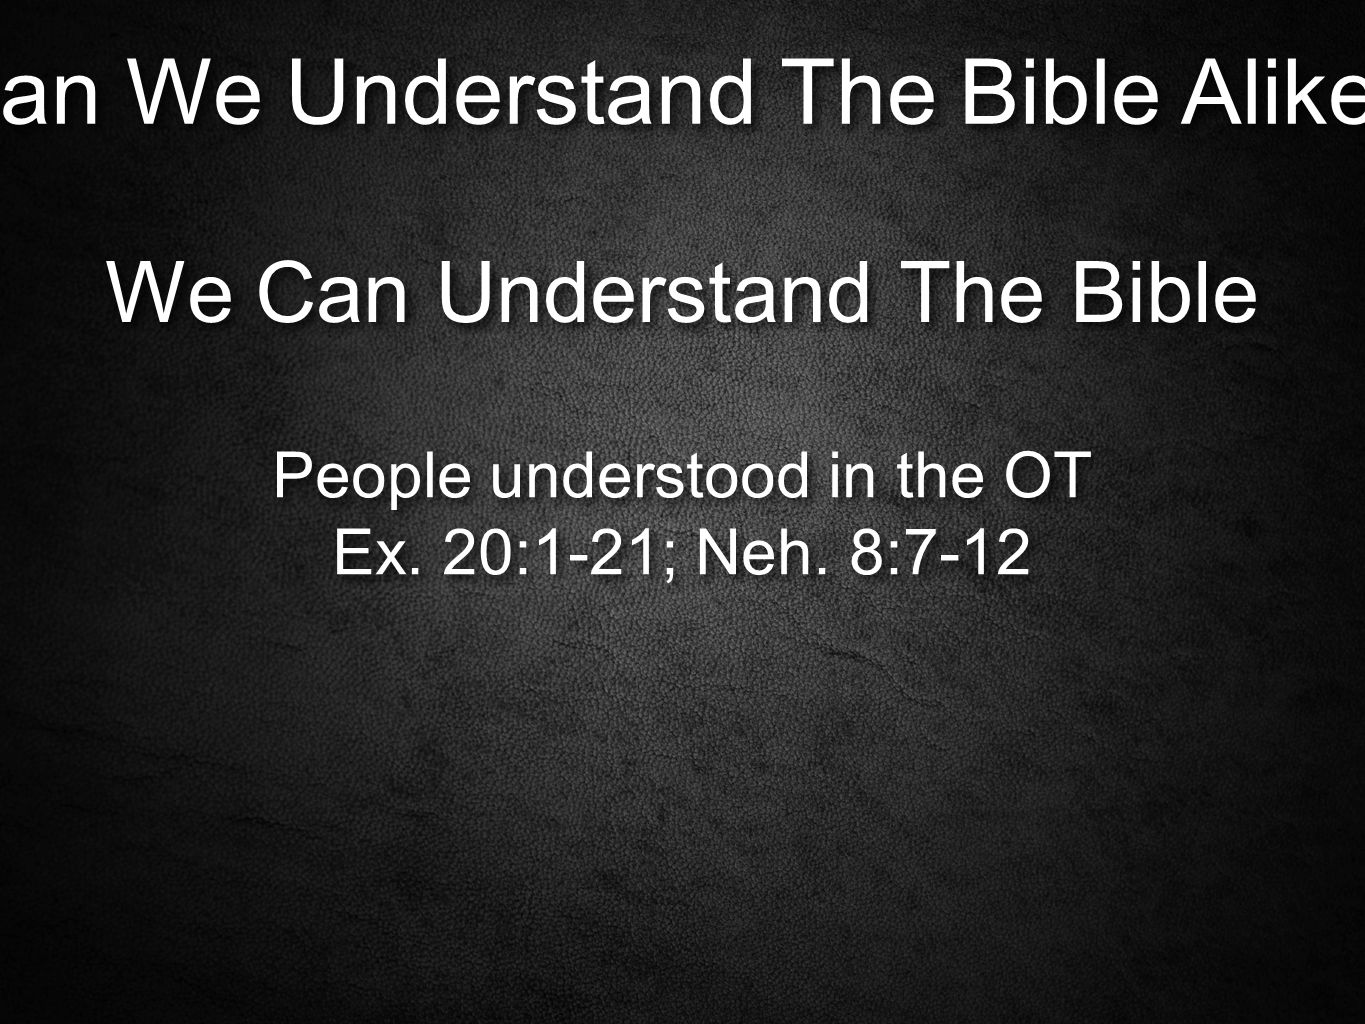 Can We Understand The Bible Alike. We Can Understand The Bible People understood in the OT Ex.